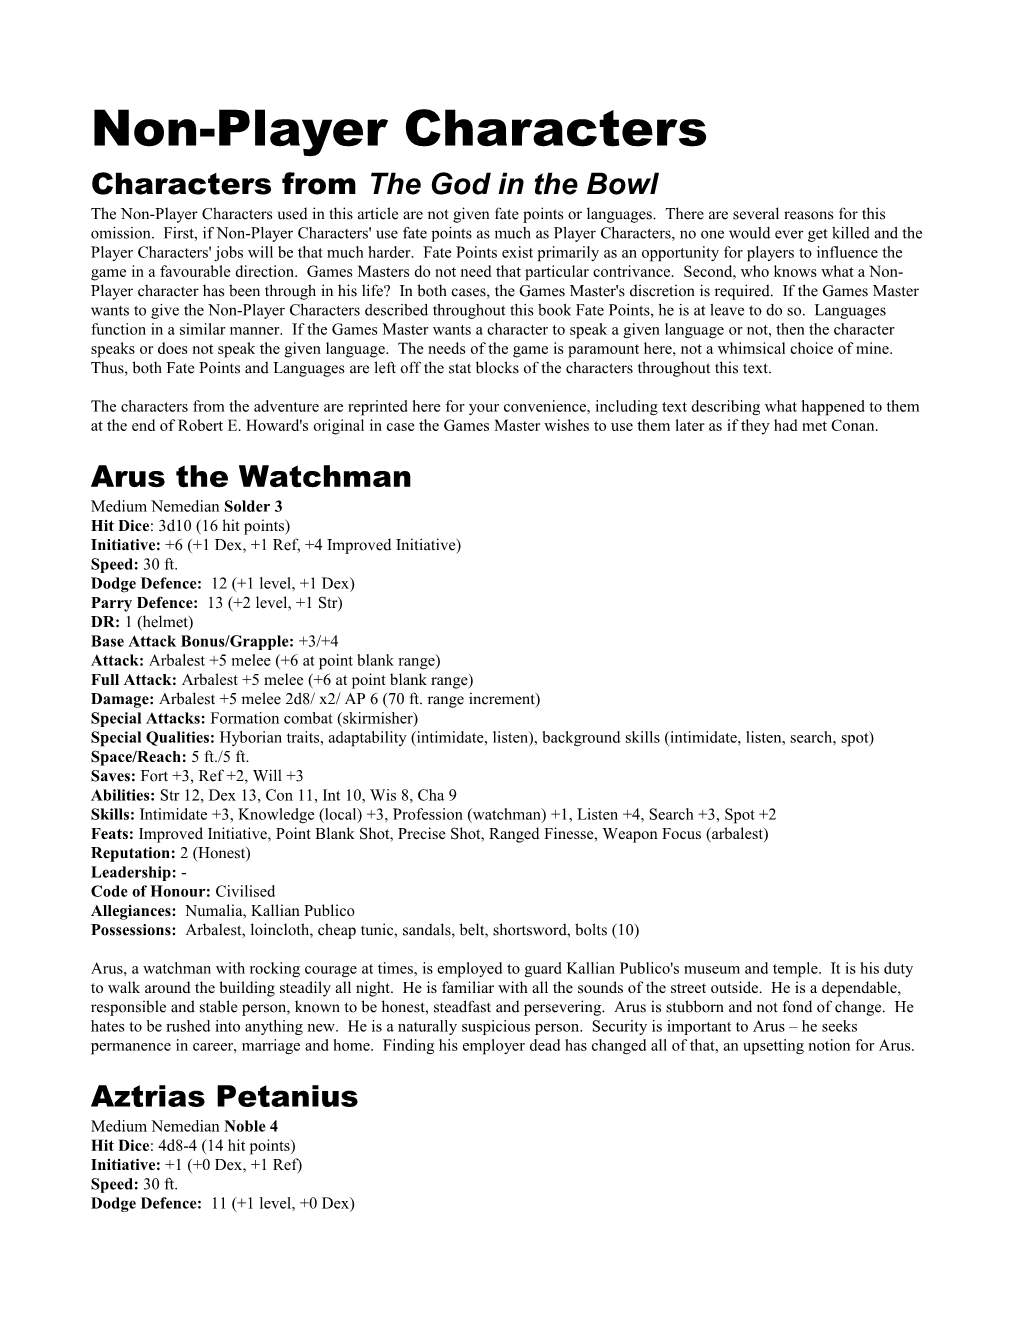 Characters from the God in the Bowl